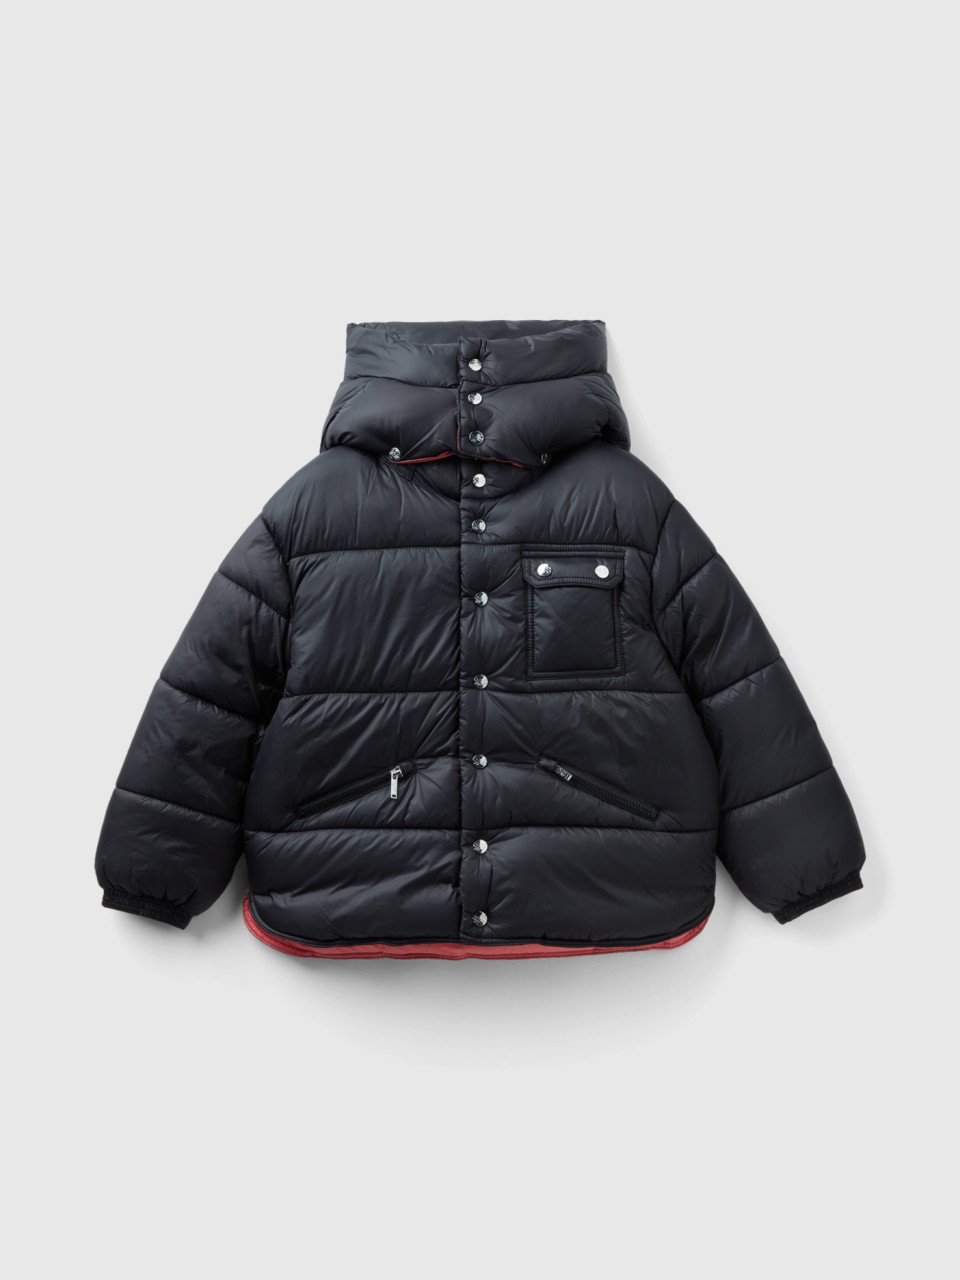 Benetton, Padded Jacket With Removable Hood, Black, Kids